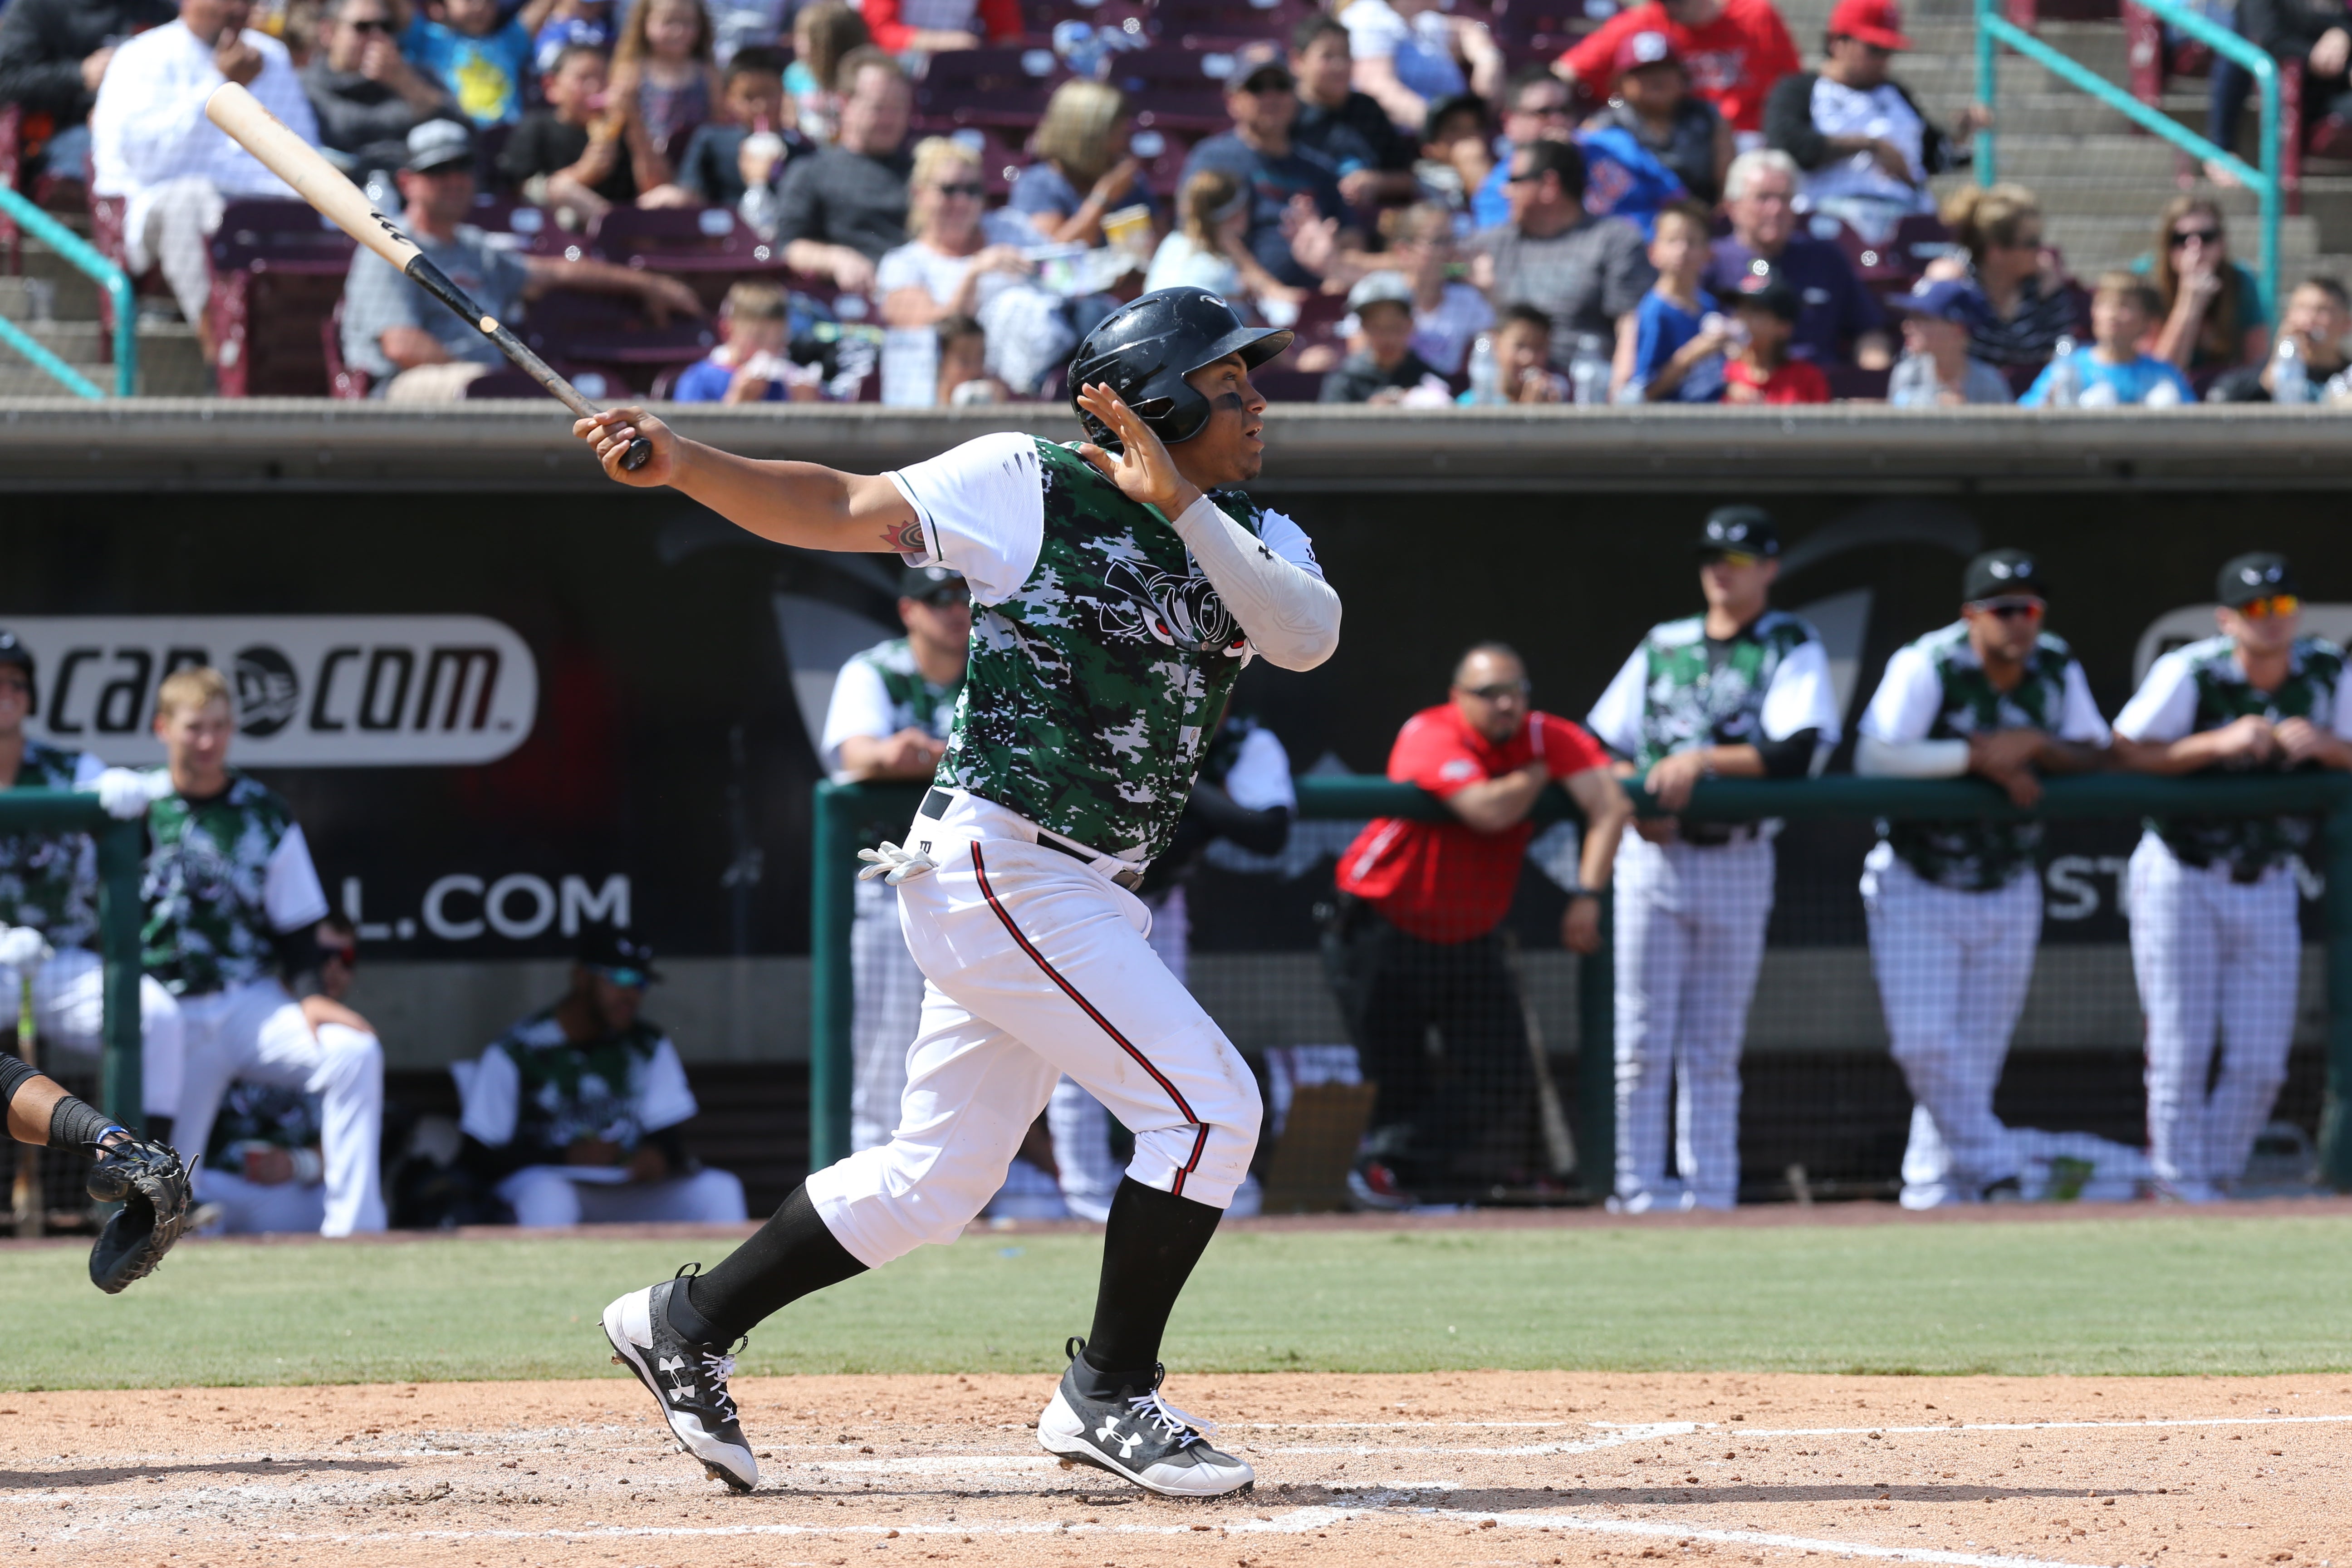 Miami Marlins prospect profile of the week: Josh Naylor - Fish Stripes